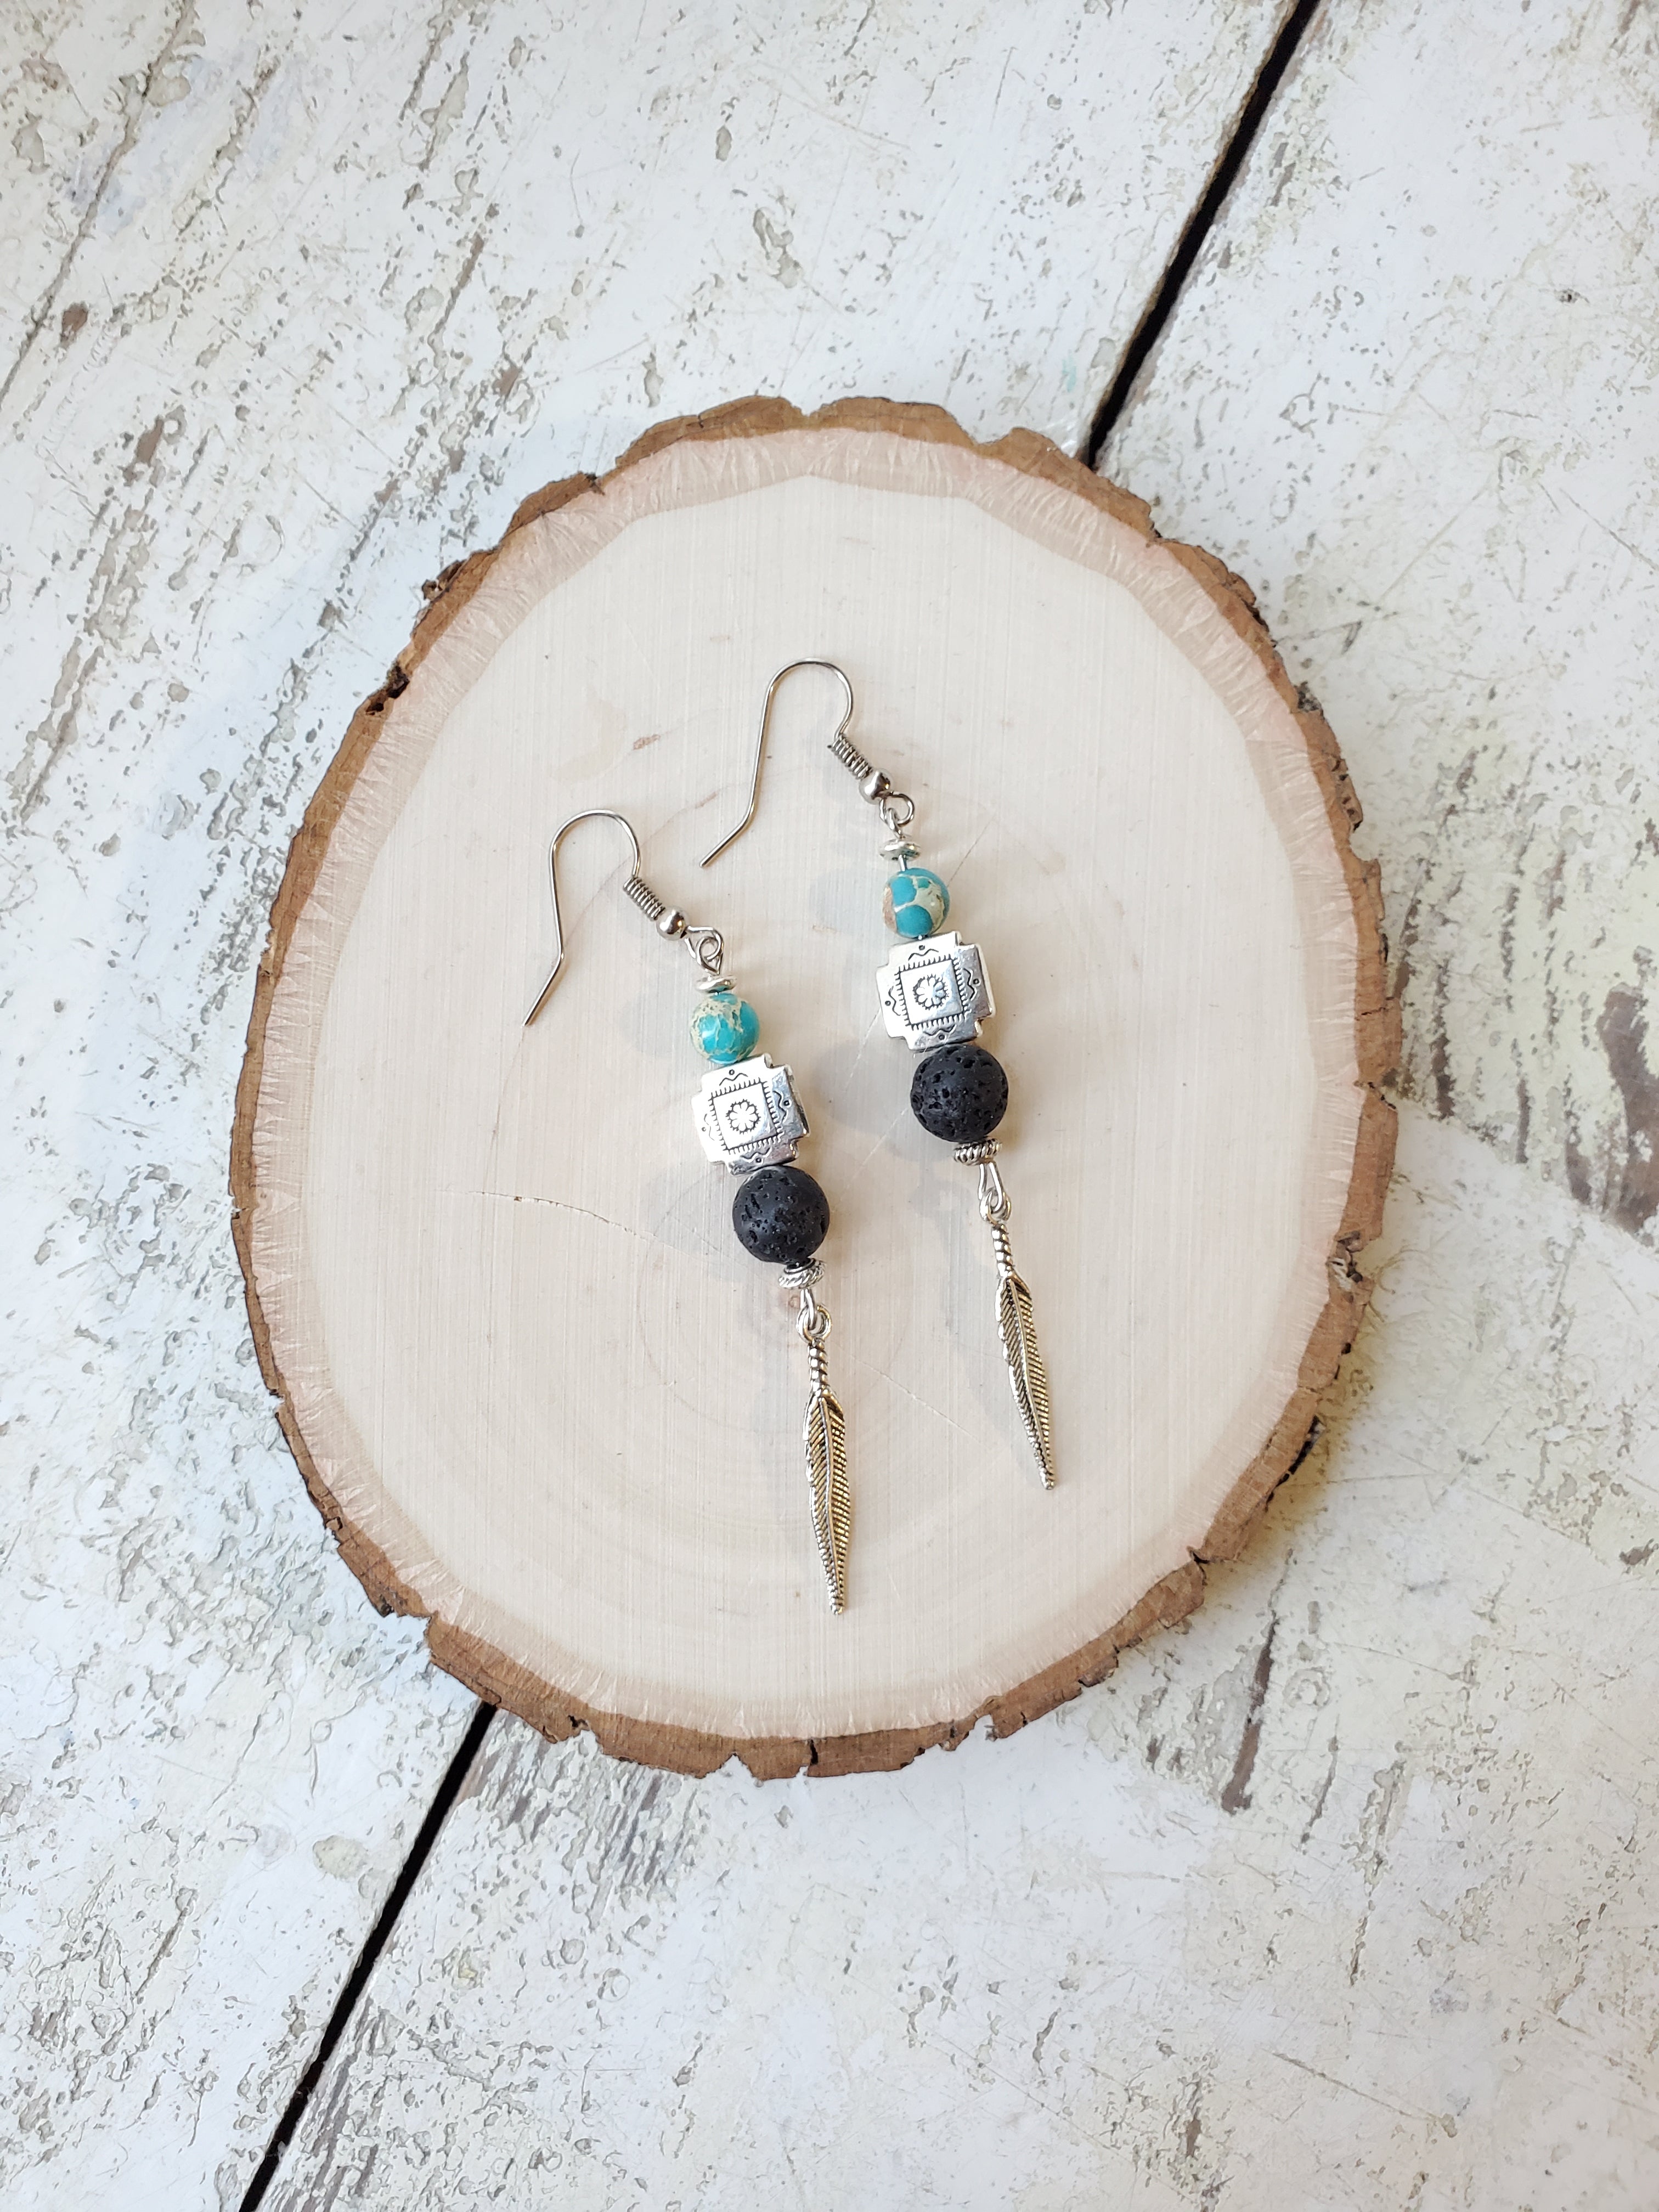 Southwestern Feather Lava Bead Diffuser Earrings with Jasper